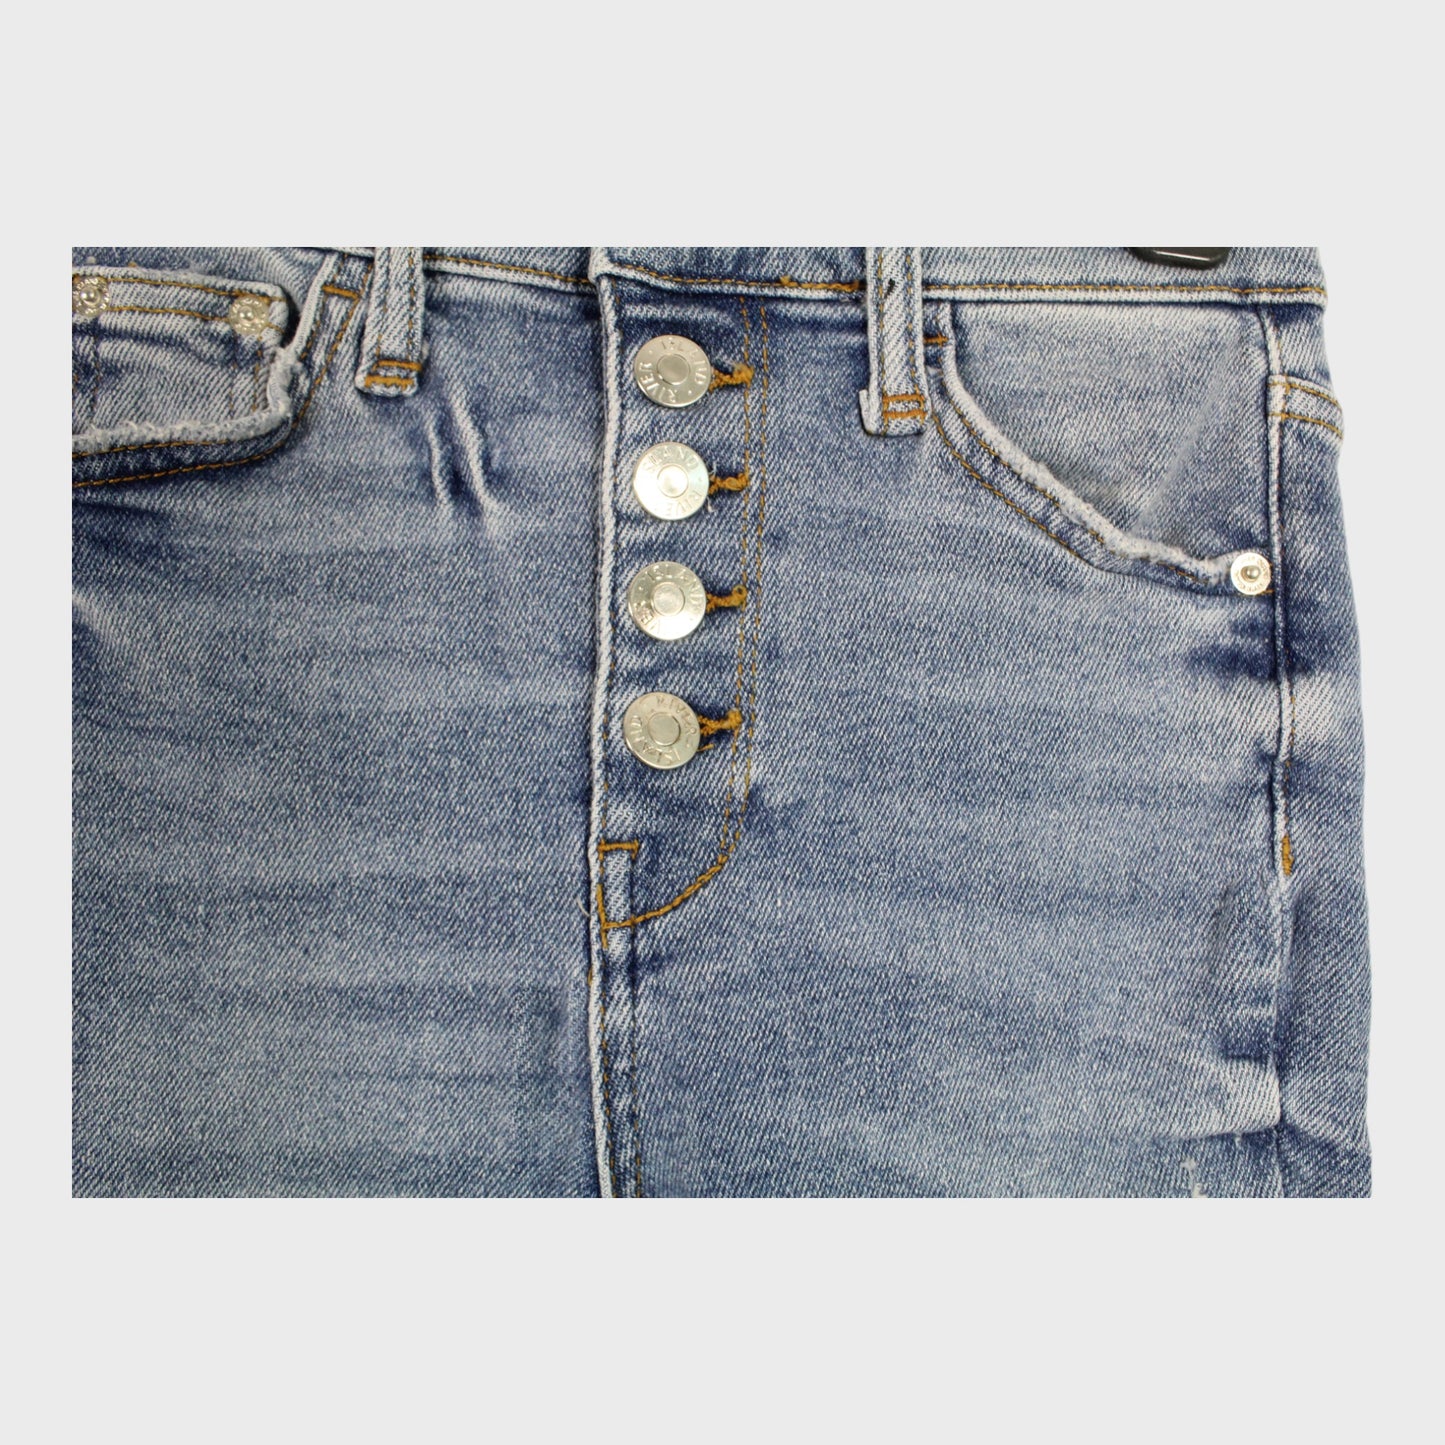 Women's Button Fly Distressed Skinny Jeans